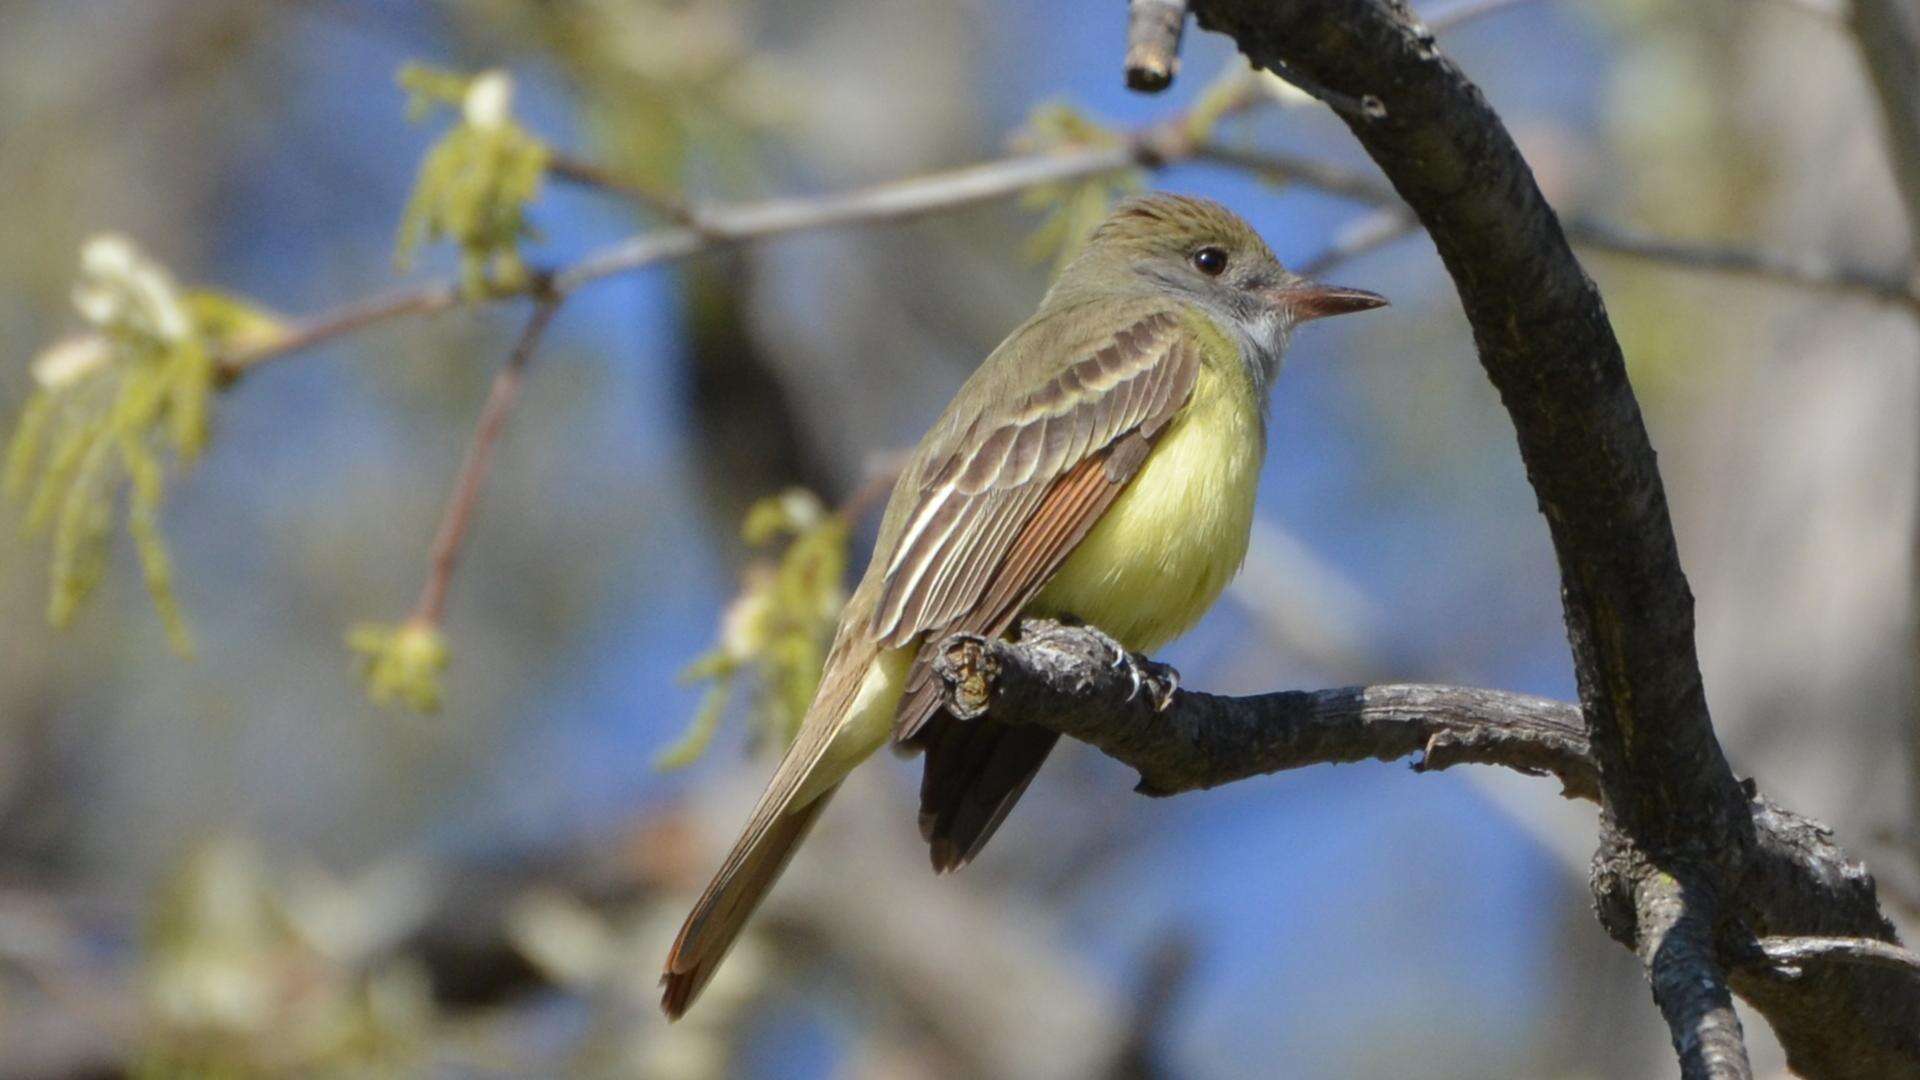 Image of Great Crested Flycatcher